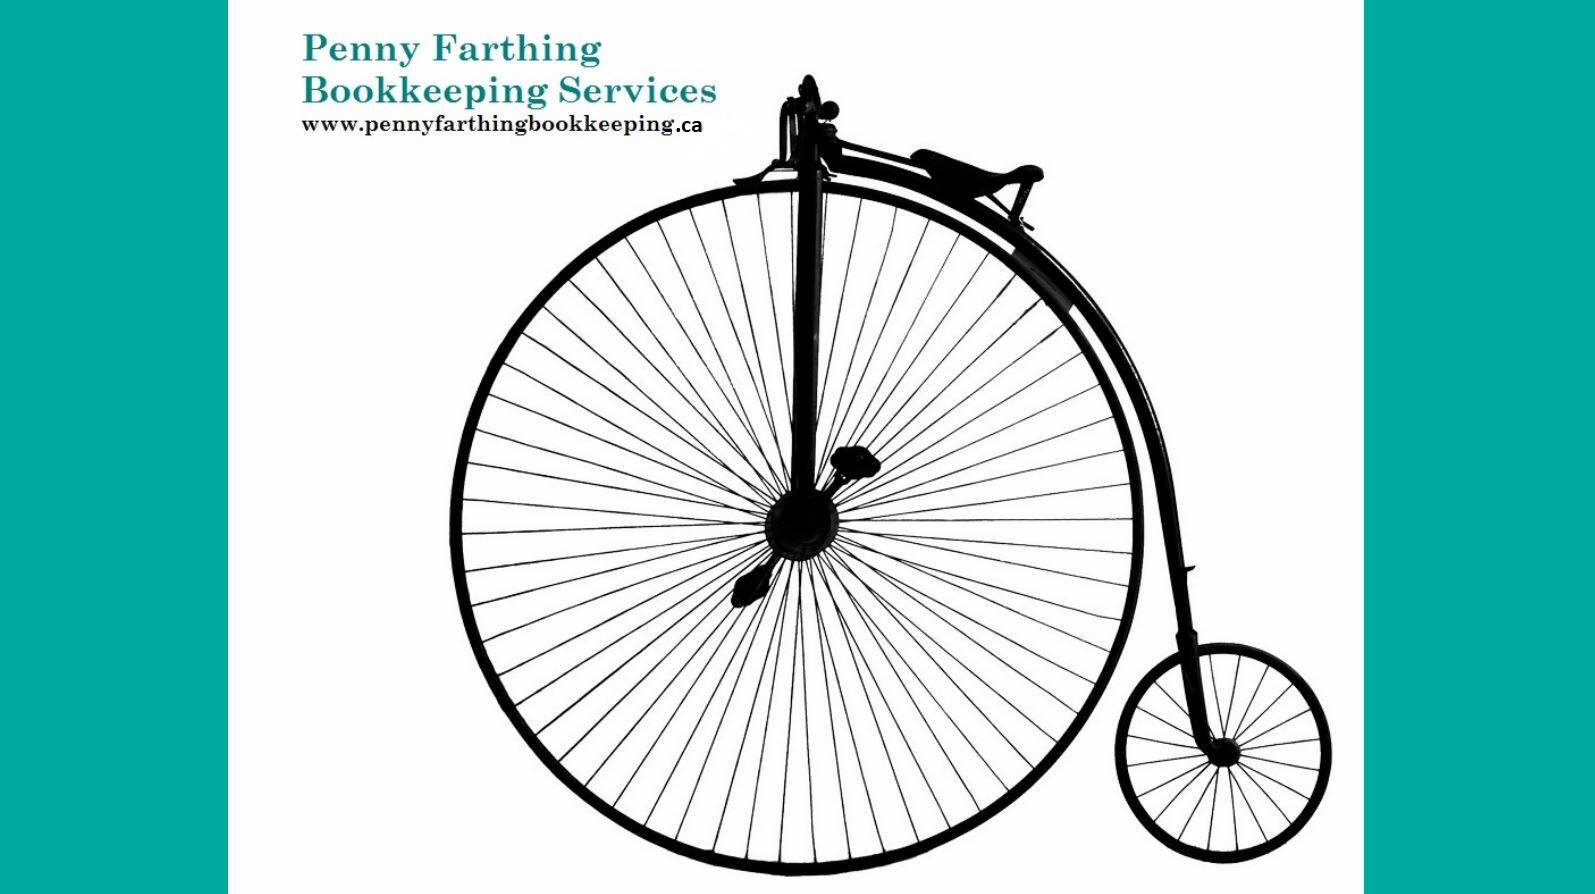 Penny Farthing book keeping